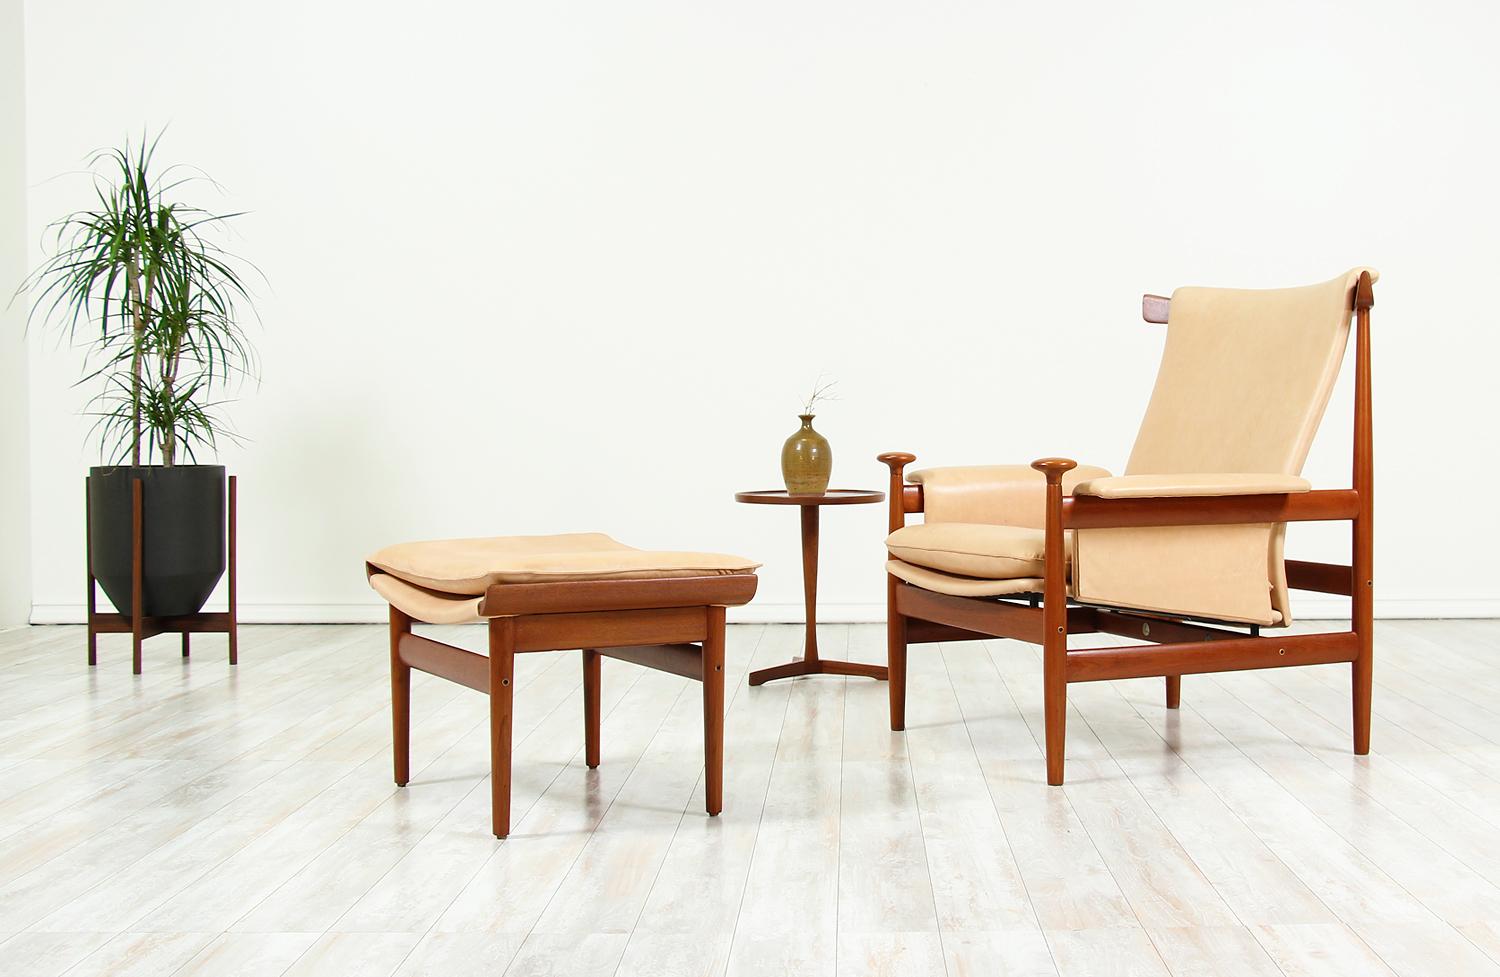 Iconic Danish modern “Bwana” chair and ottoman designed by Finn Juhl for France & Son in Denmark in 1962. Originally designed as an updated version of the Chieftain chair, the Bwana model-152 chair features a sculpted teak wood frame and new full